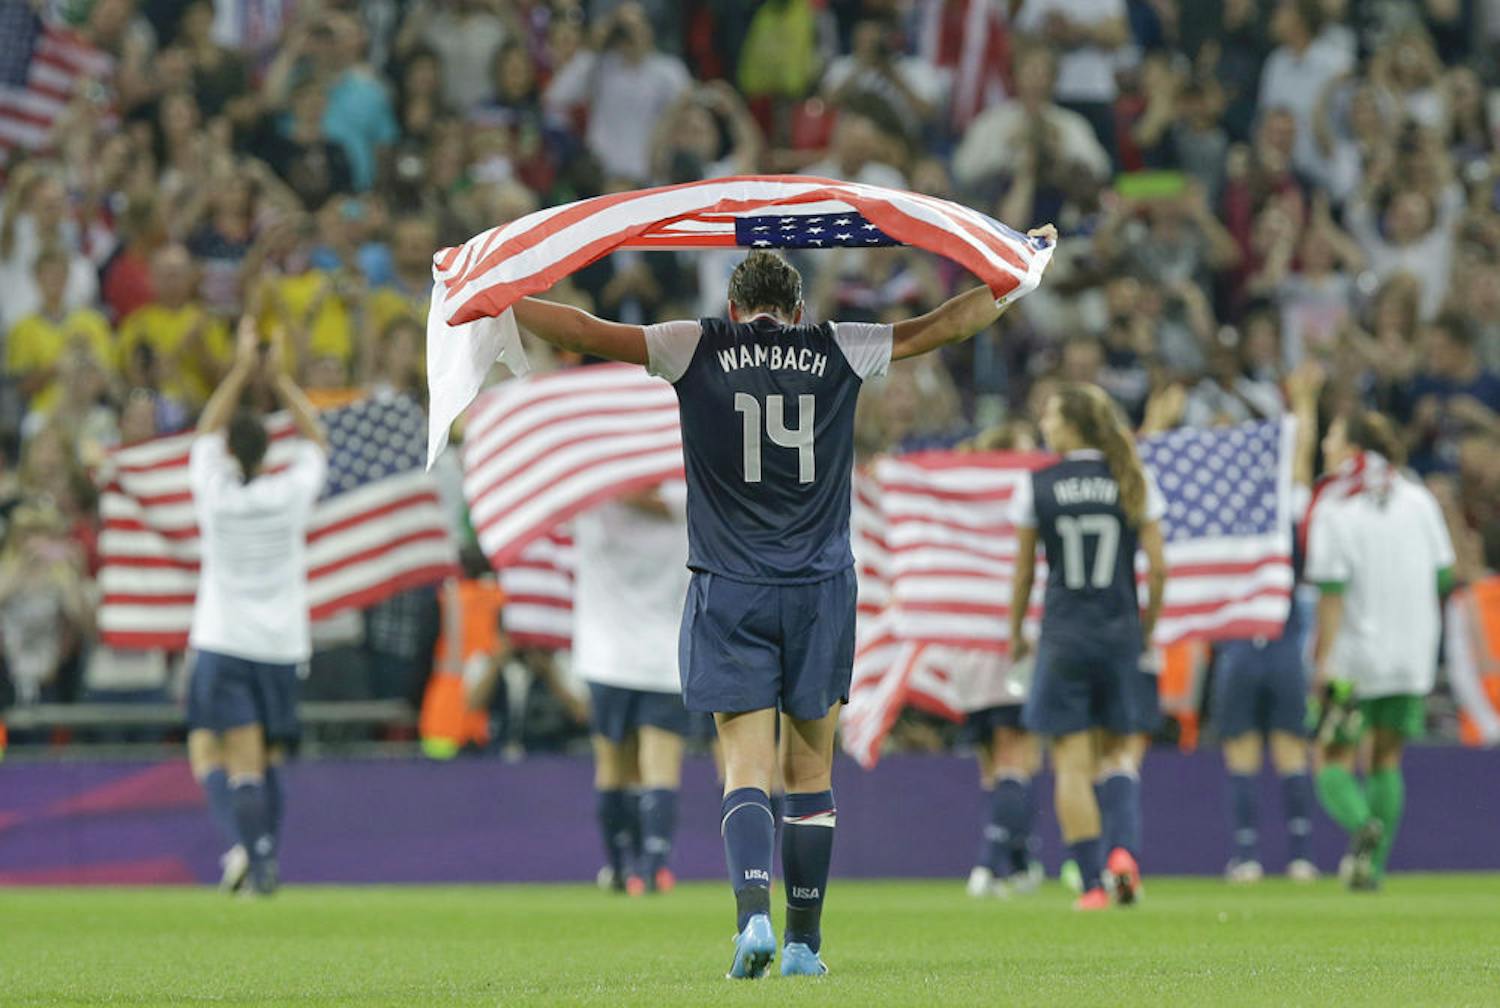 Abby Wambach, draped in an American flag, celebrates with teammates after winning the women's soccer gold medal match against Japan at the 2012 Summer Olympics.